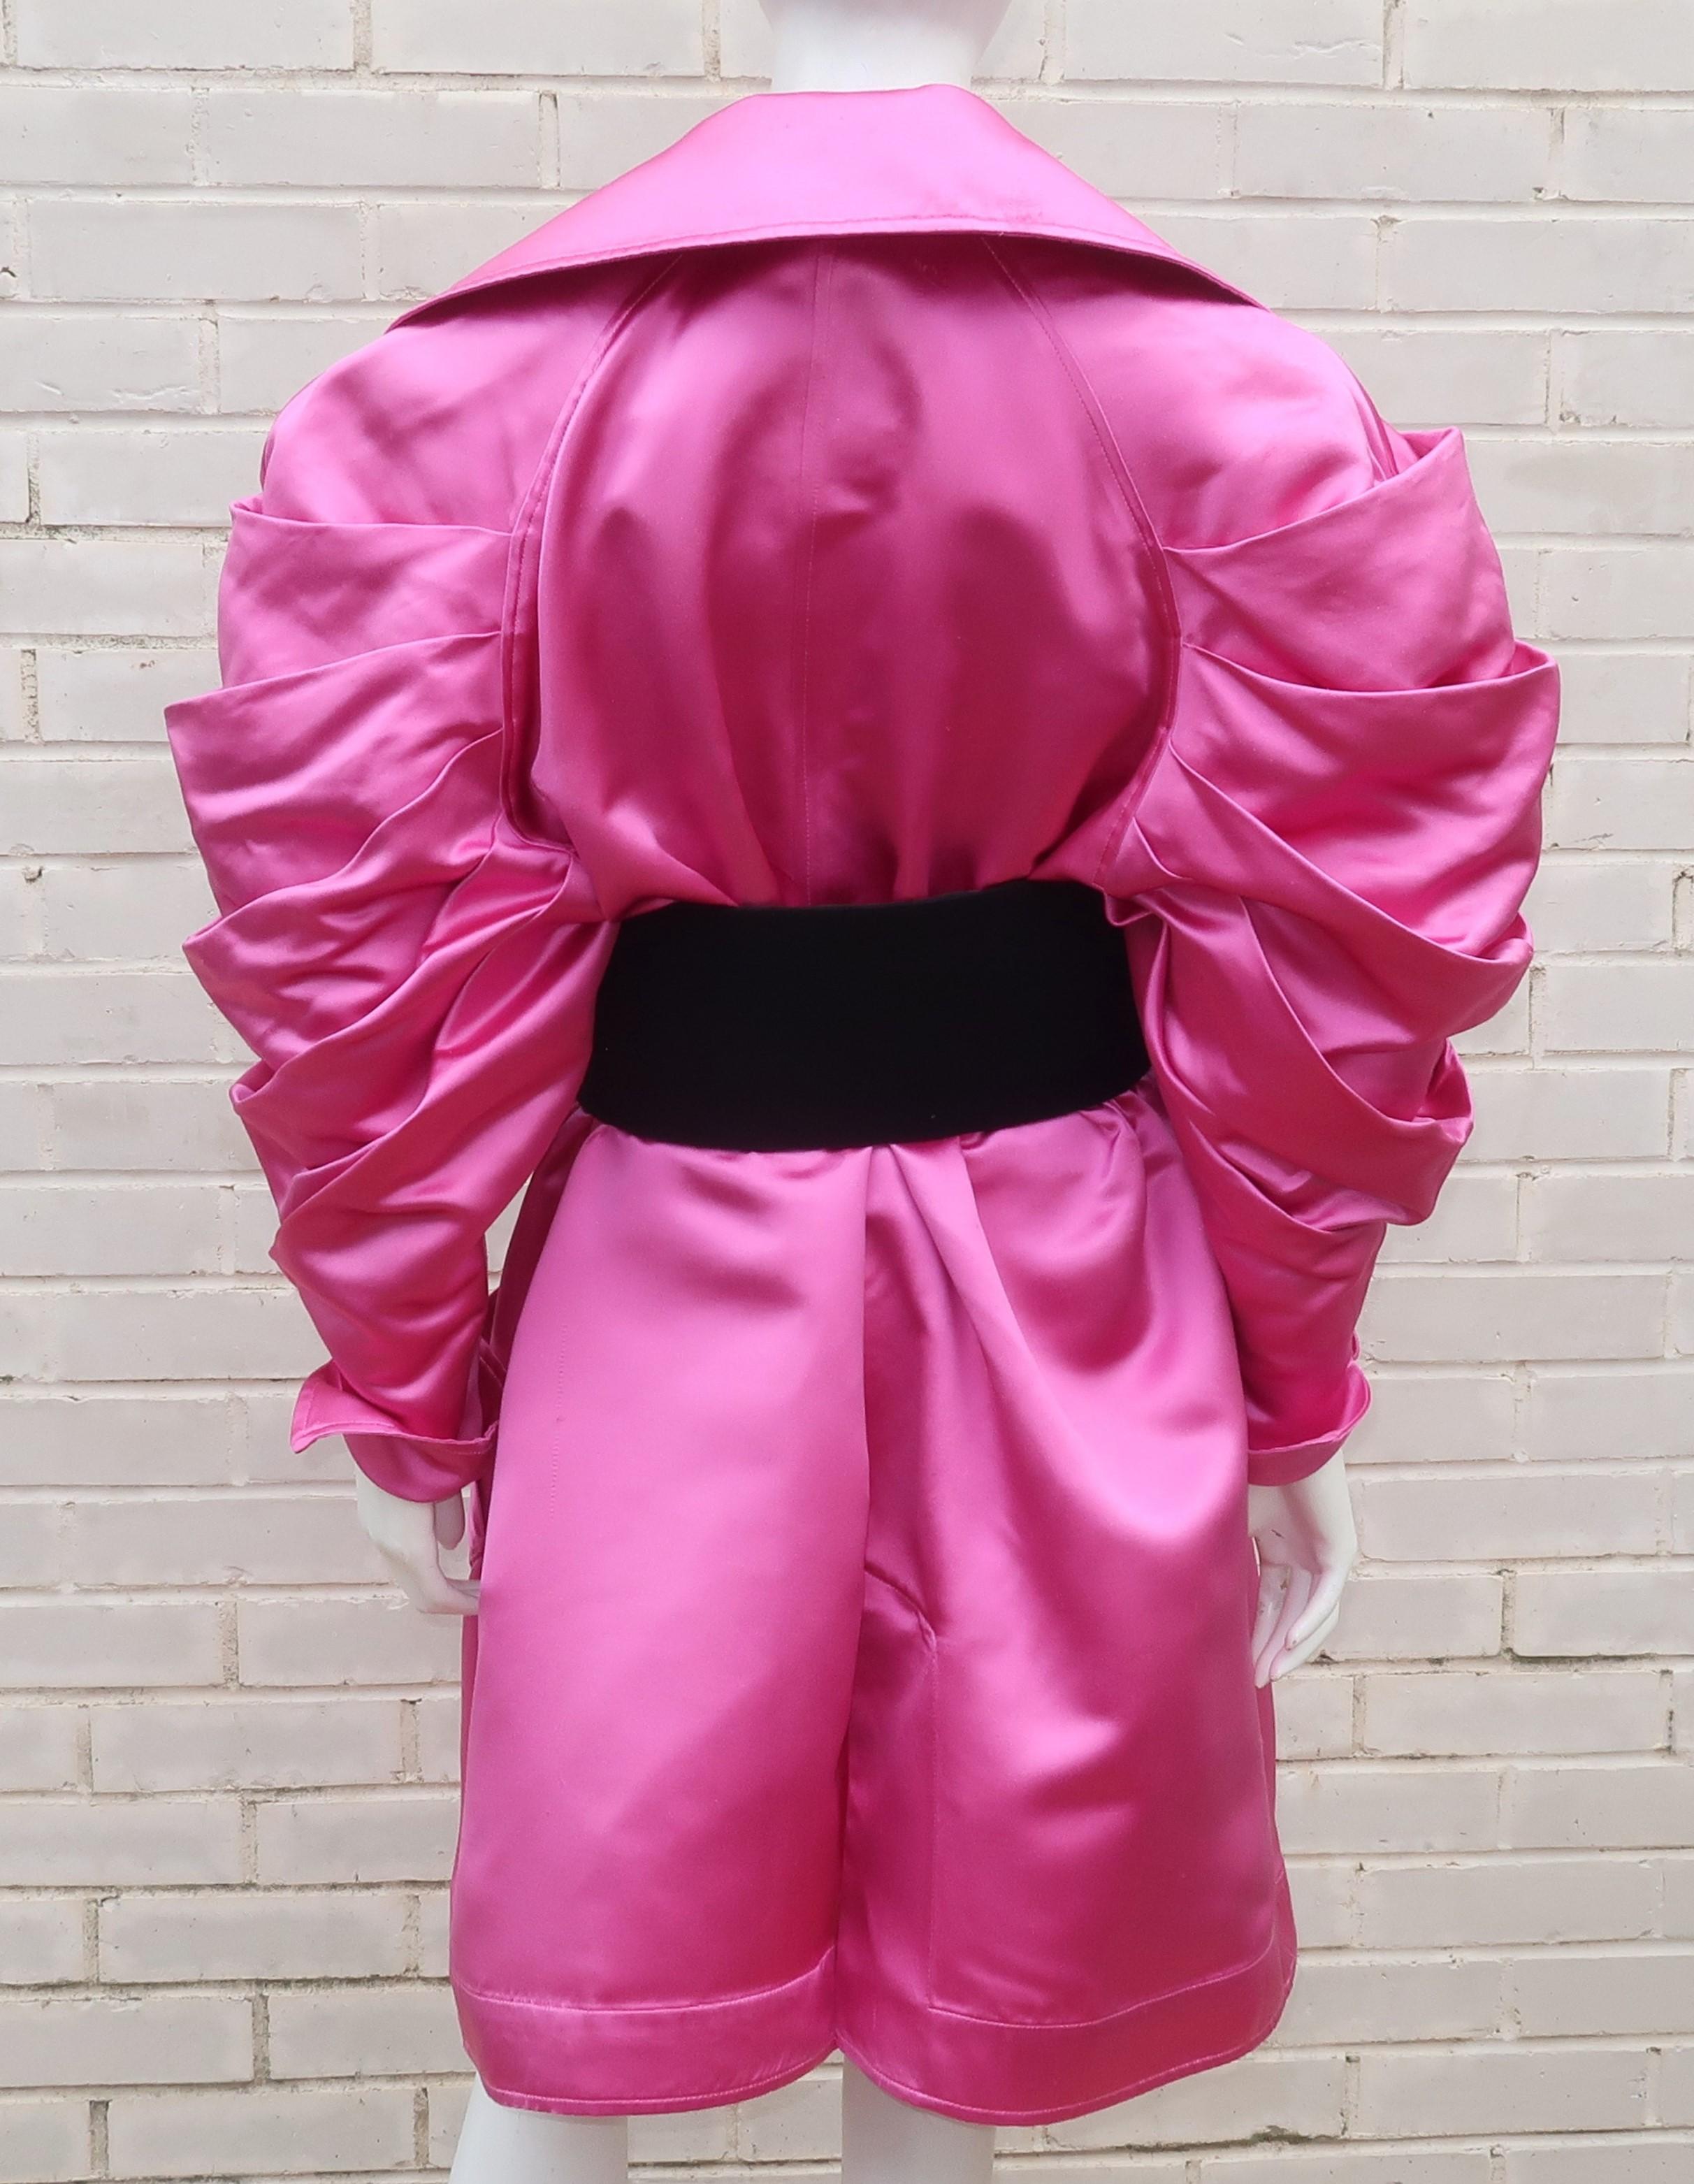 Claude Montana Hot Pink Silk Satin Coat With Ruched Sleeves, 1980's 1